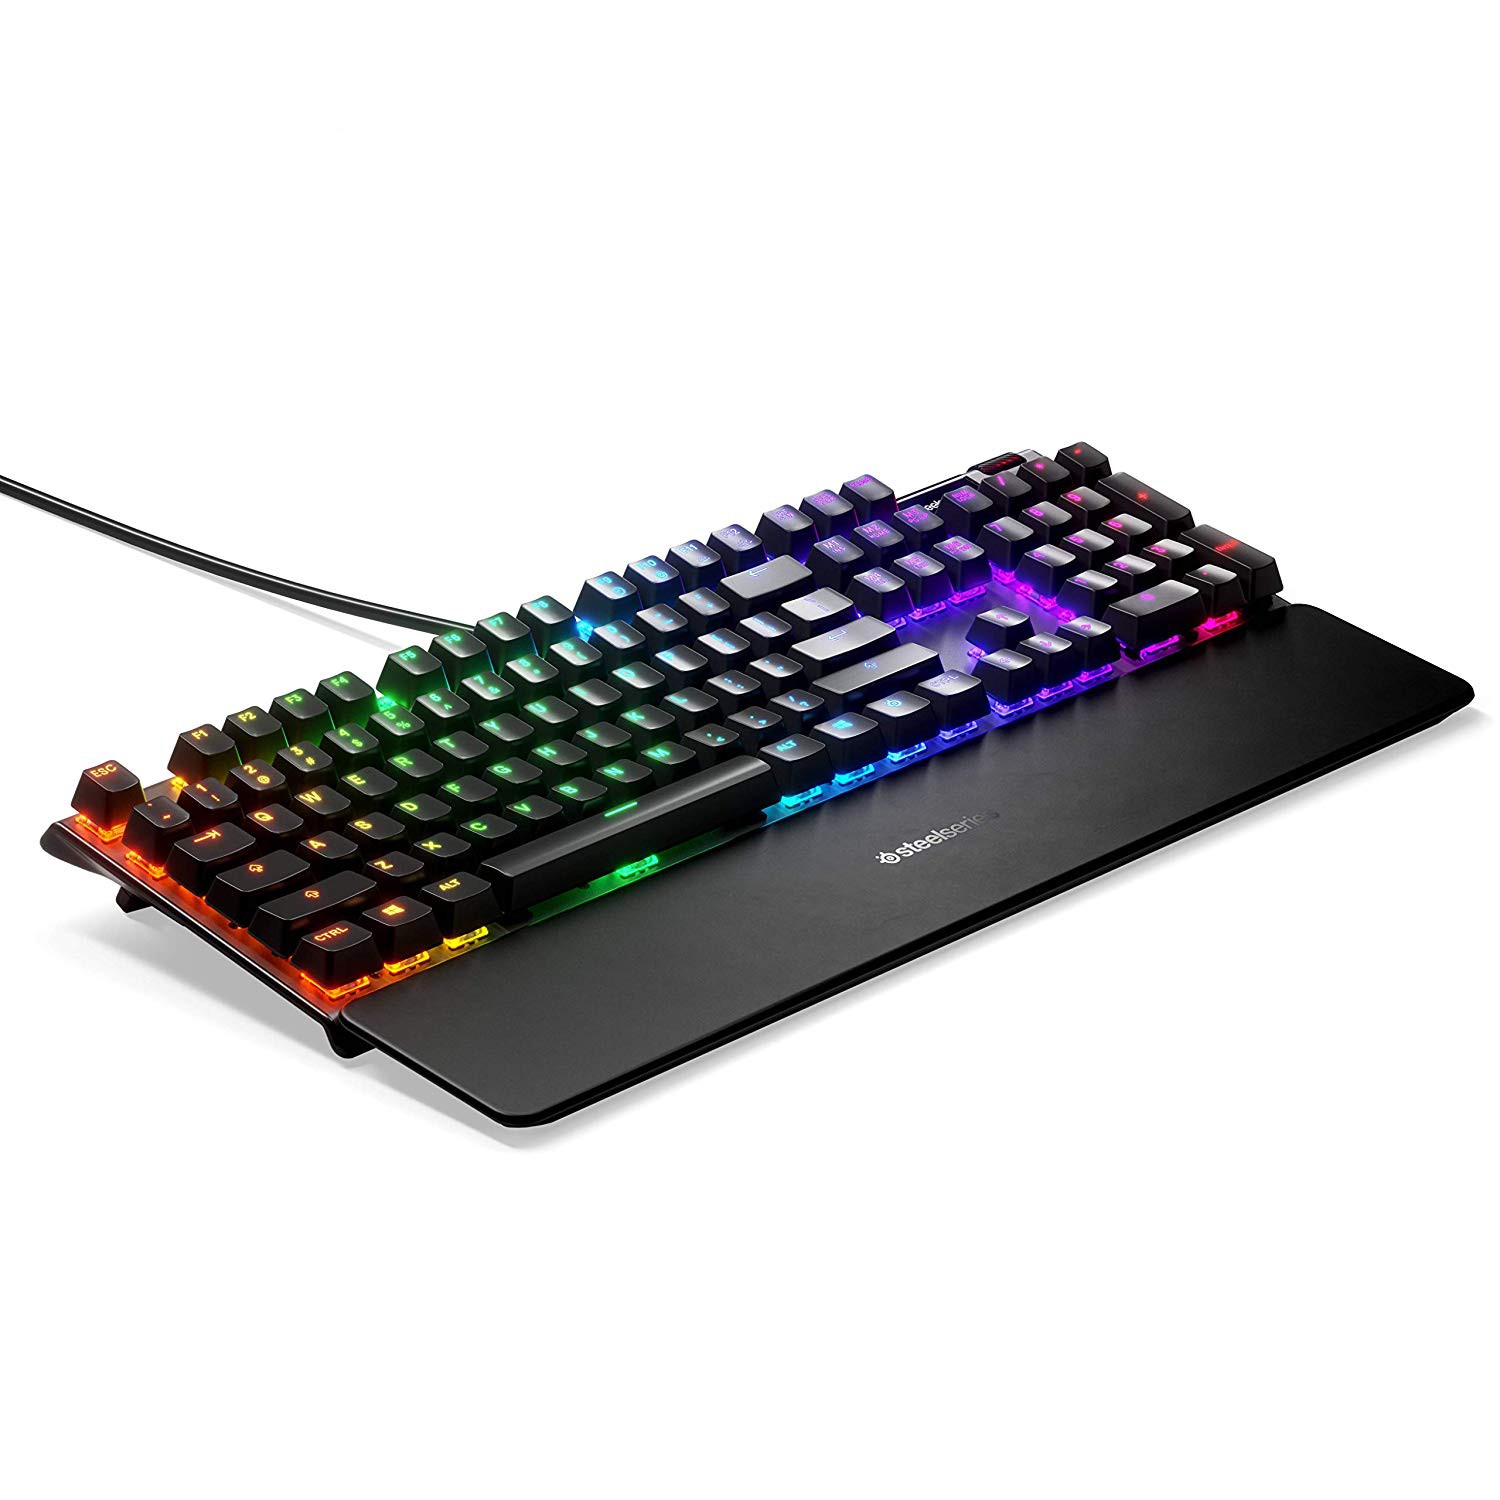 Steelseries Apex 7 keyboard  (US) (Red switch)